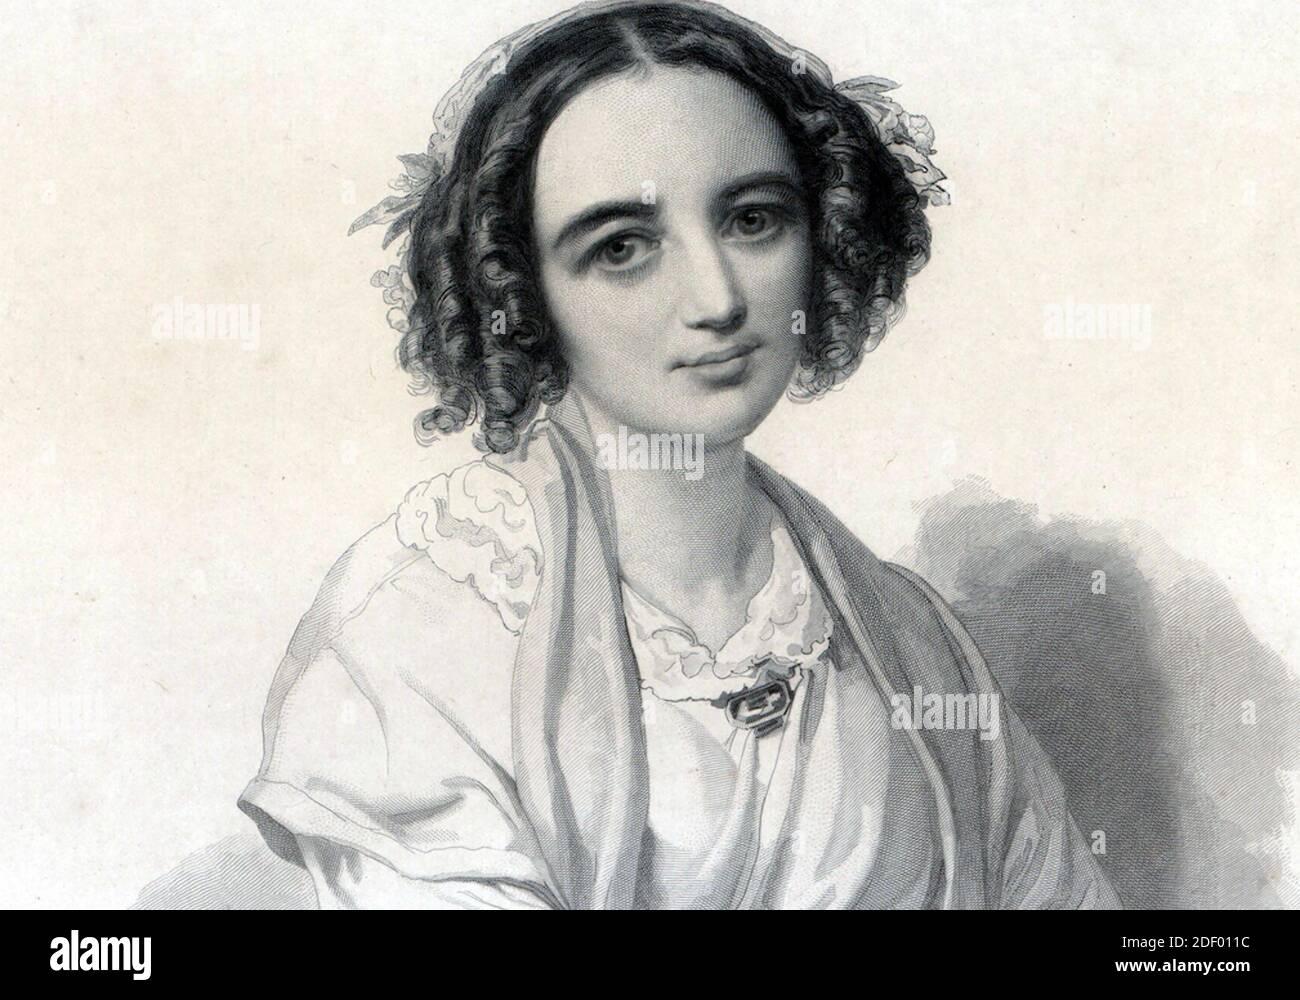 FANNY MENDELSSOHN (1805-1847) German composer and pianist, sister of the more famous Felix Mendelssohn and after her marriage called Fanny Hensel. Sketch about 1830. Stock Photo